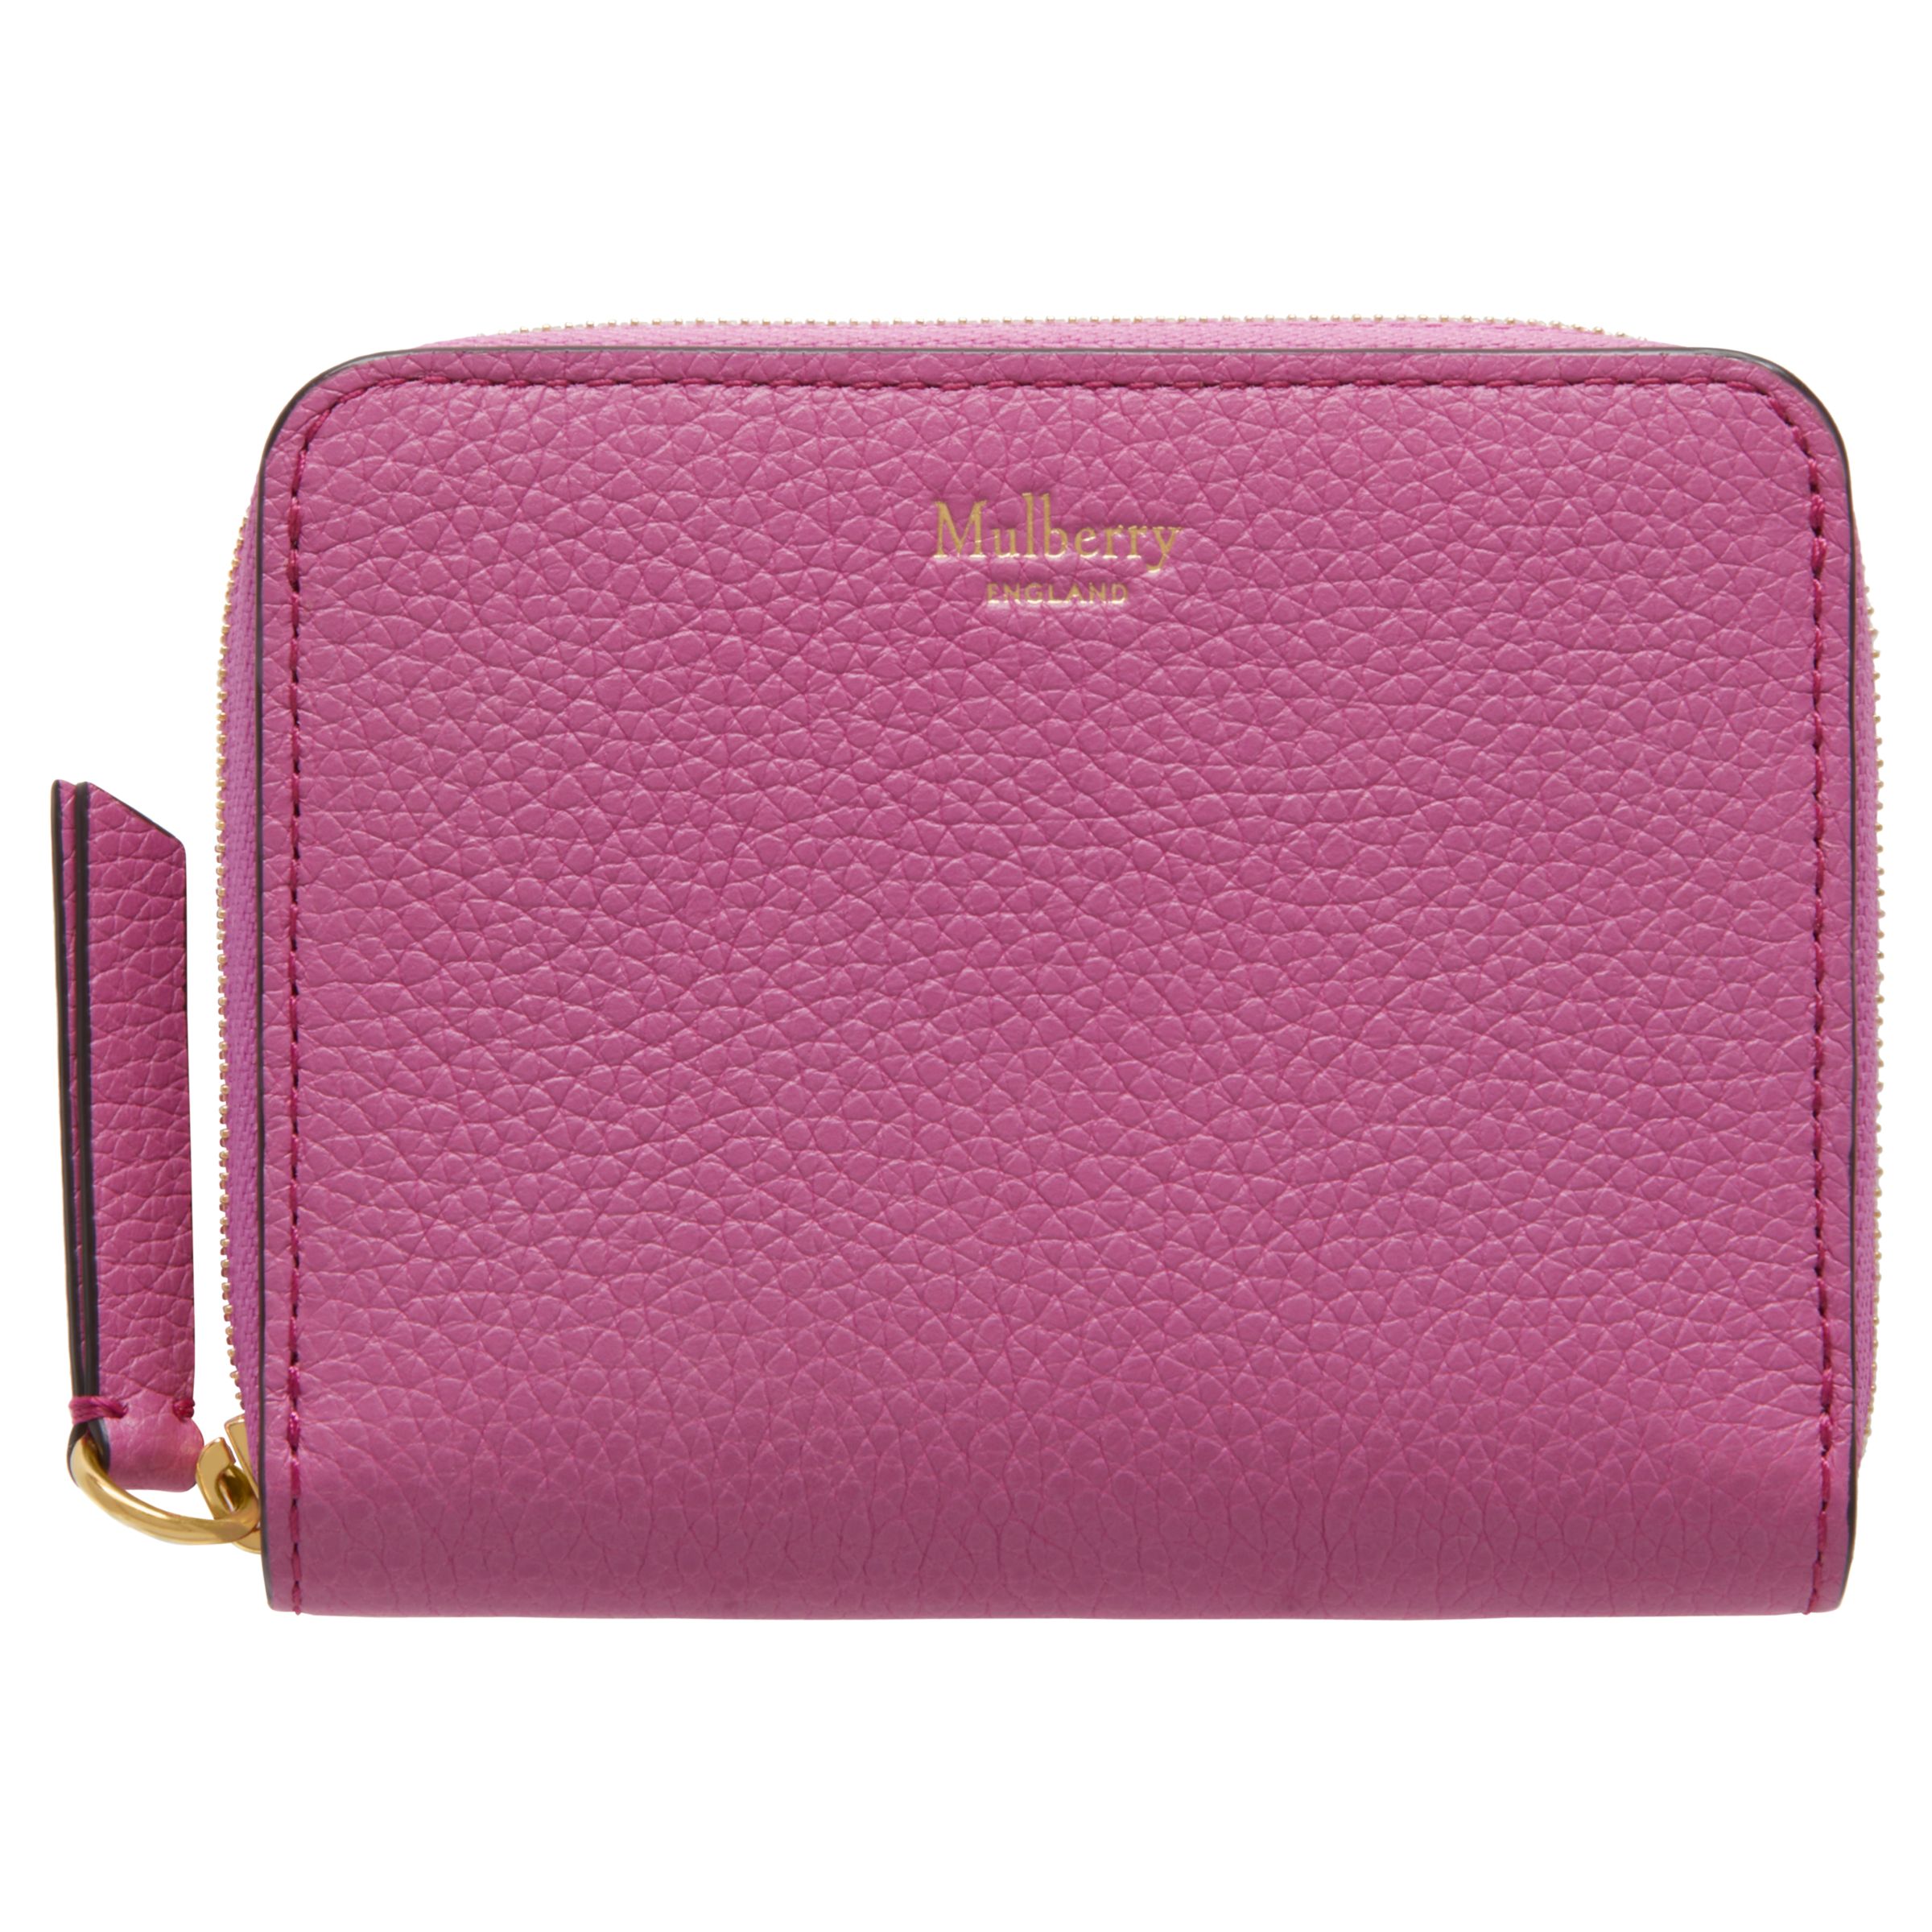 Mulberry Small Zip Around Leather Purse